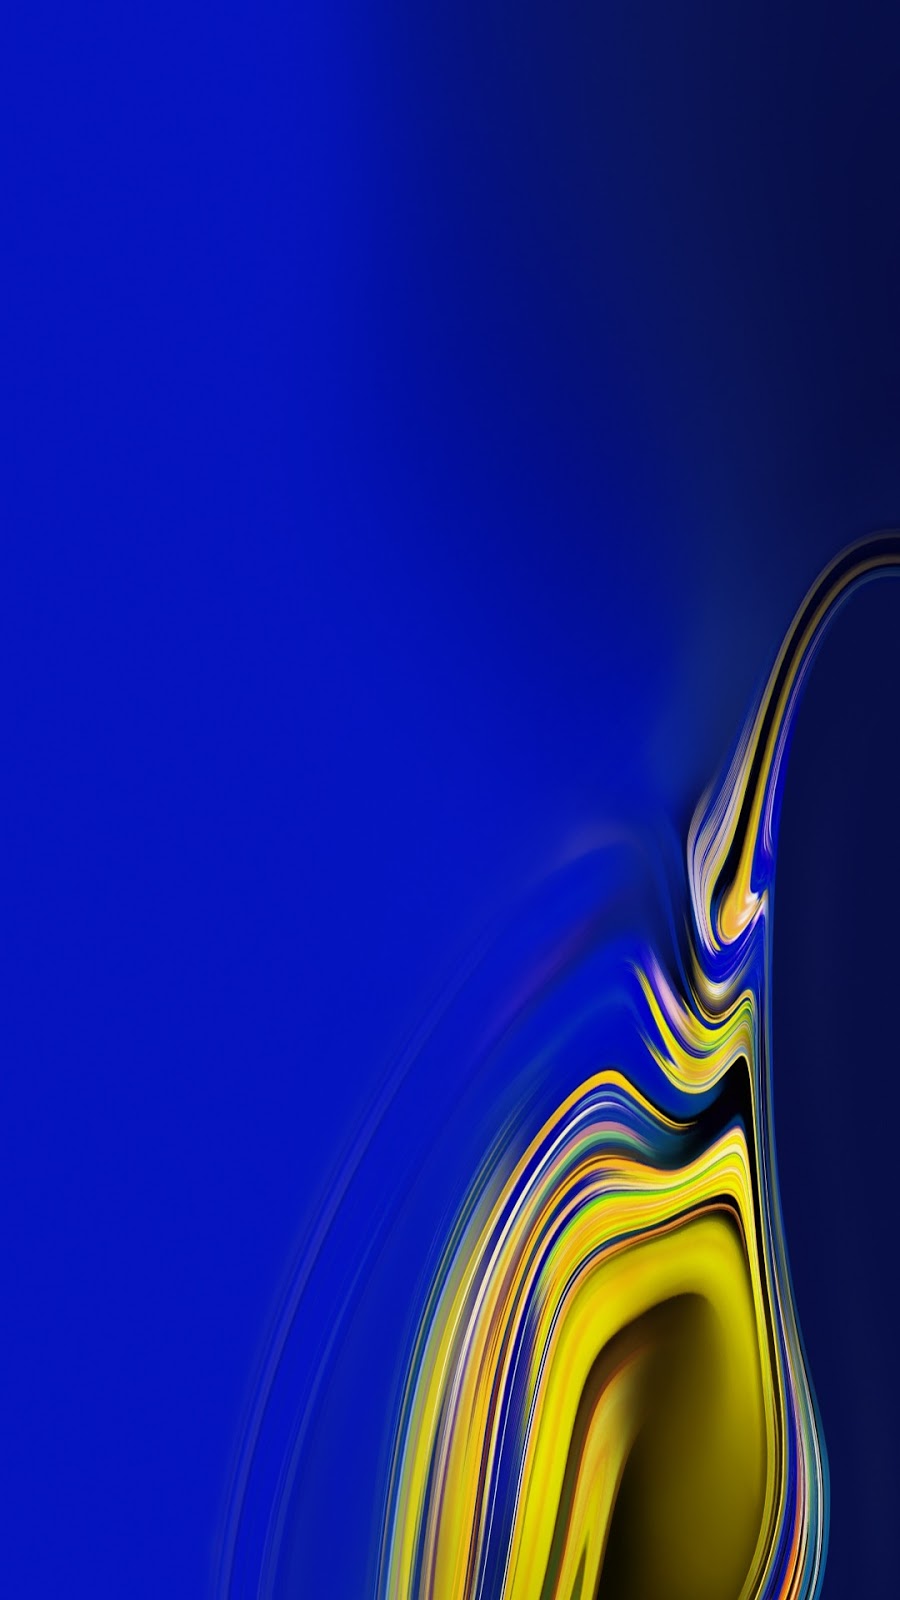 Samsung Galaxy Note 9 official Wallpapers For Redmi Note 4 ...